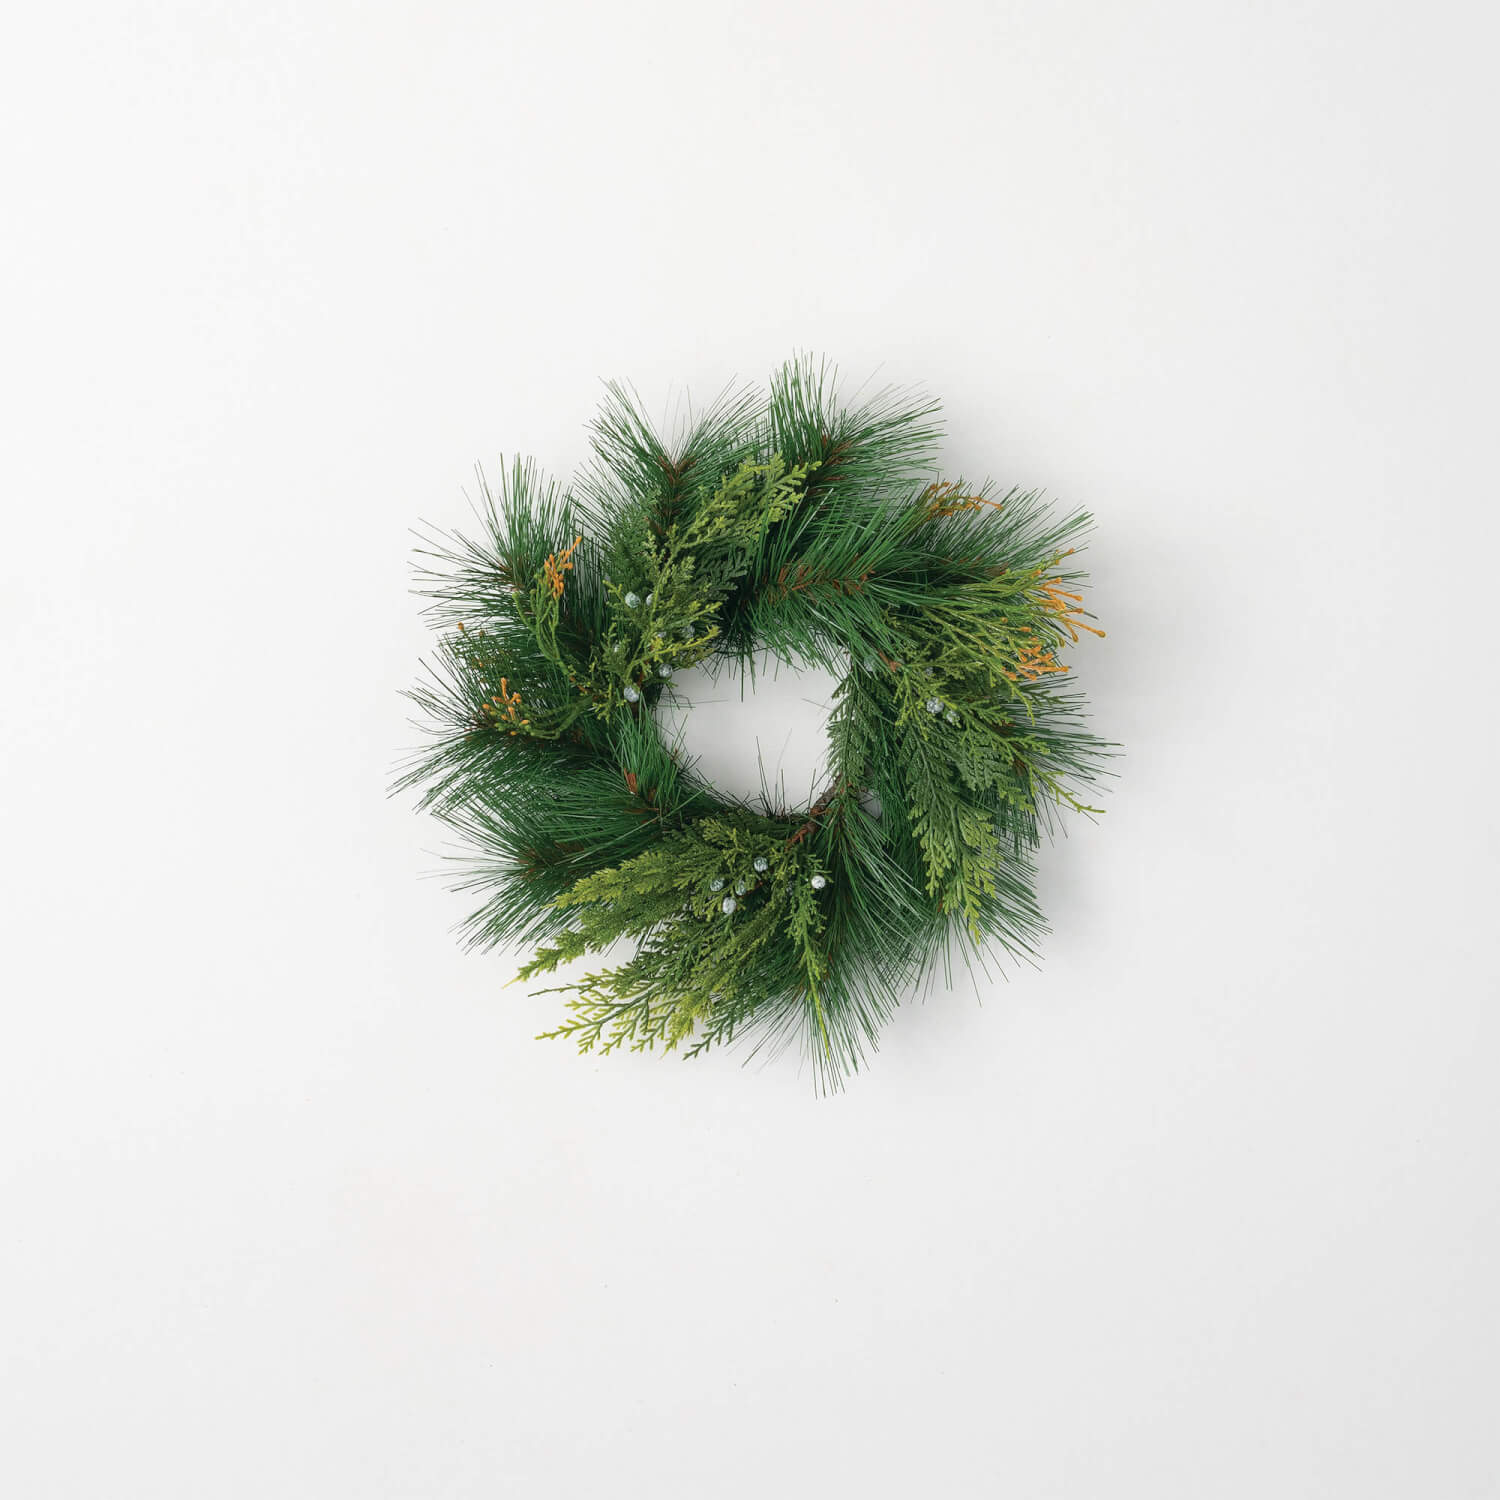 Candle Ring/Wreath - Mixed Pine & Juniper